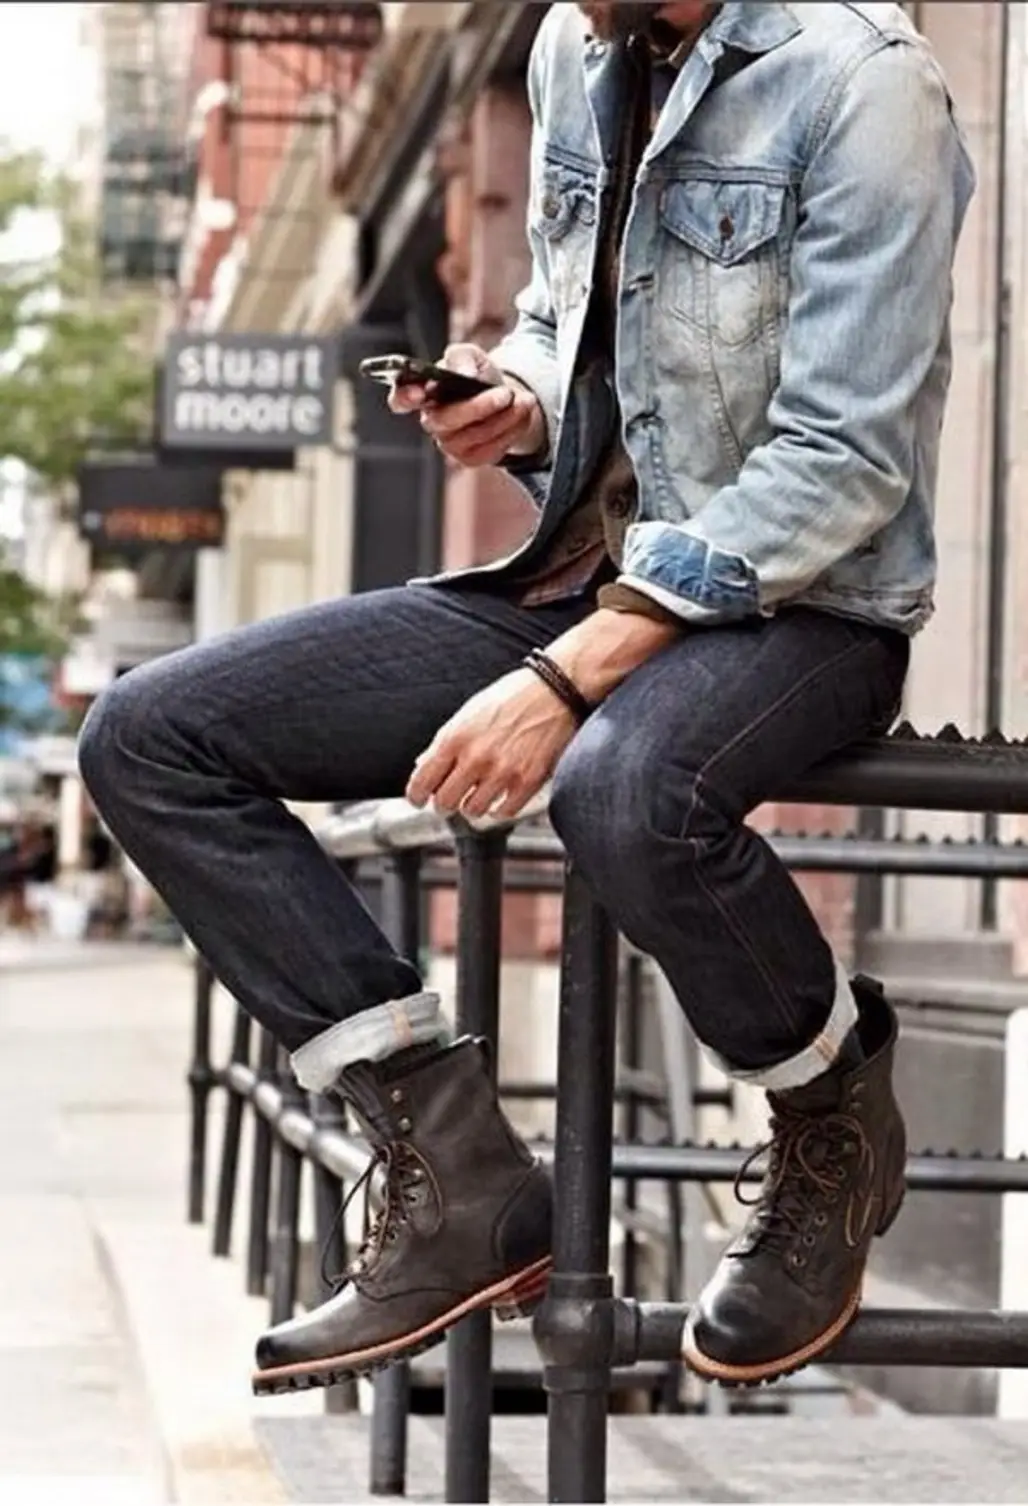 clothing,footwear,leather,street,boot,